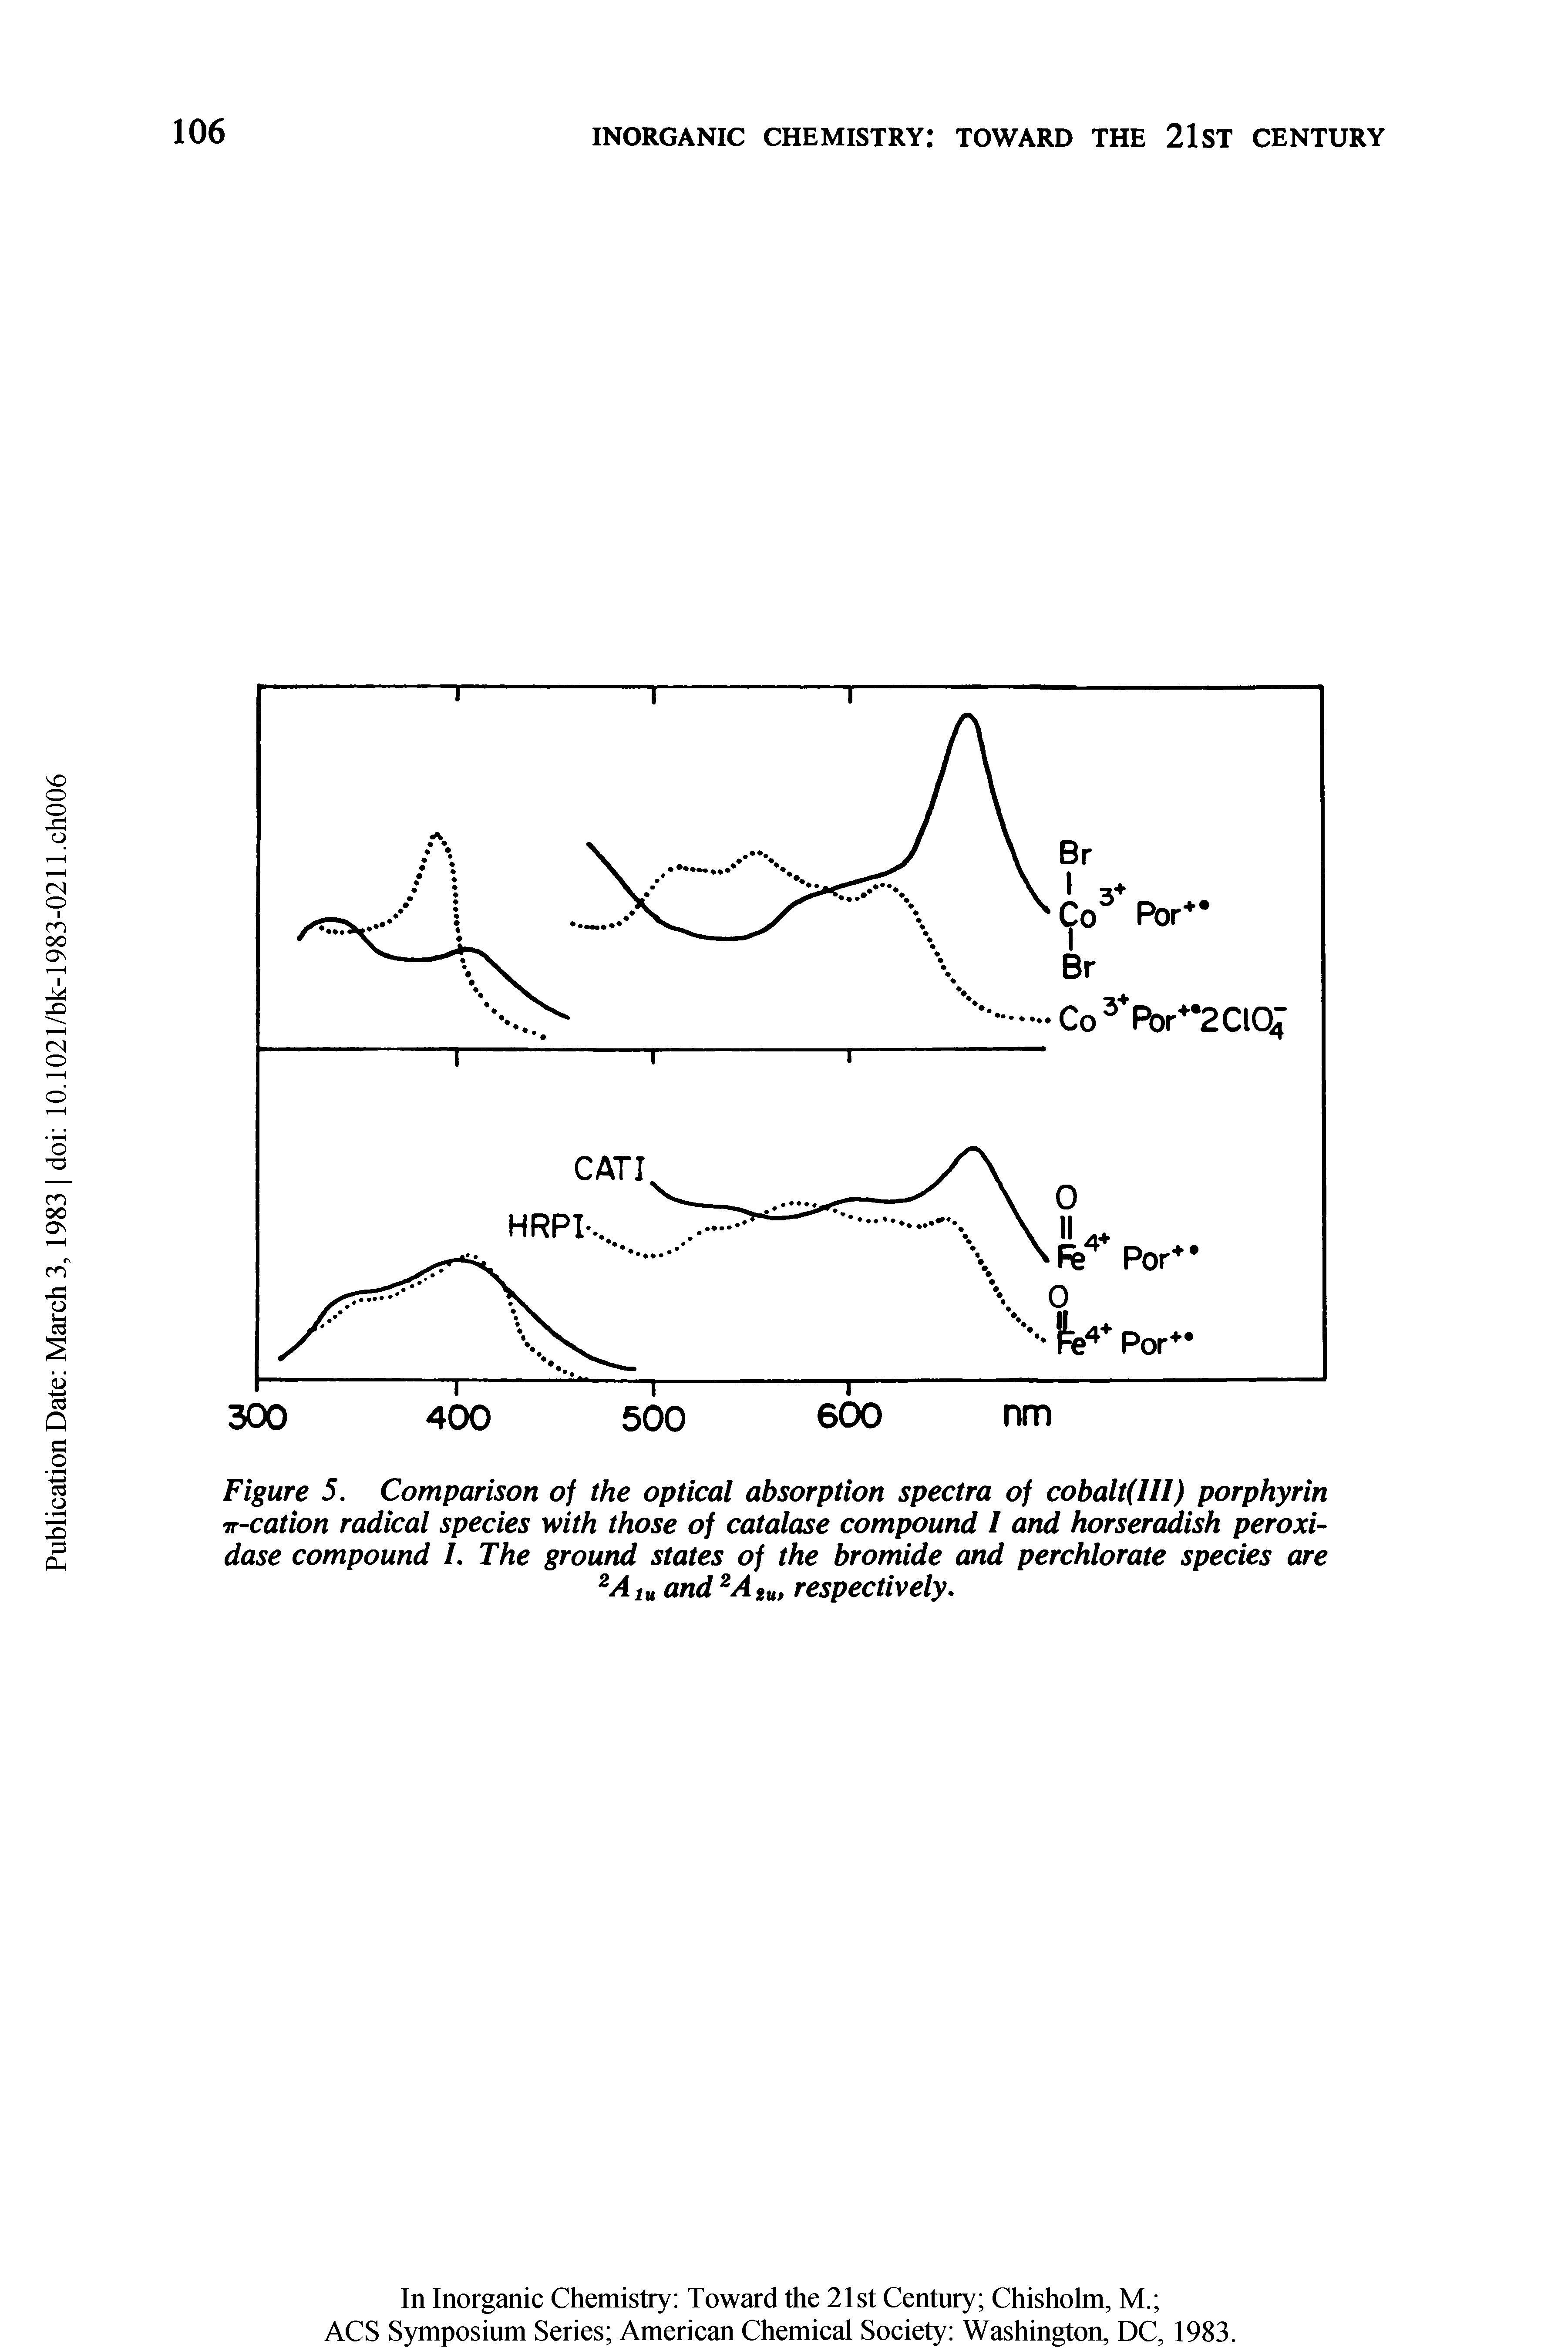 Figure 5. Comparison of the optical absorption spectra of cobalt(III) porphyrin ir-cation radical species with those of catalase compound / and horseradish peroxidase compound L The ground states of the bromide and perchlorate species are 2A lu and 2Agu, respectively.